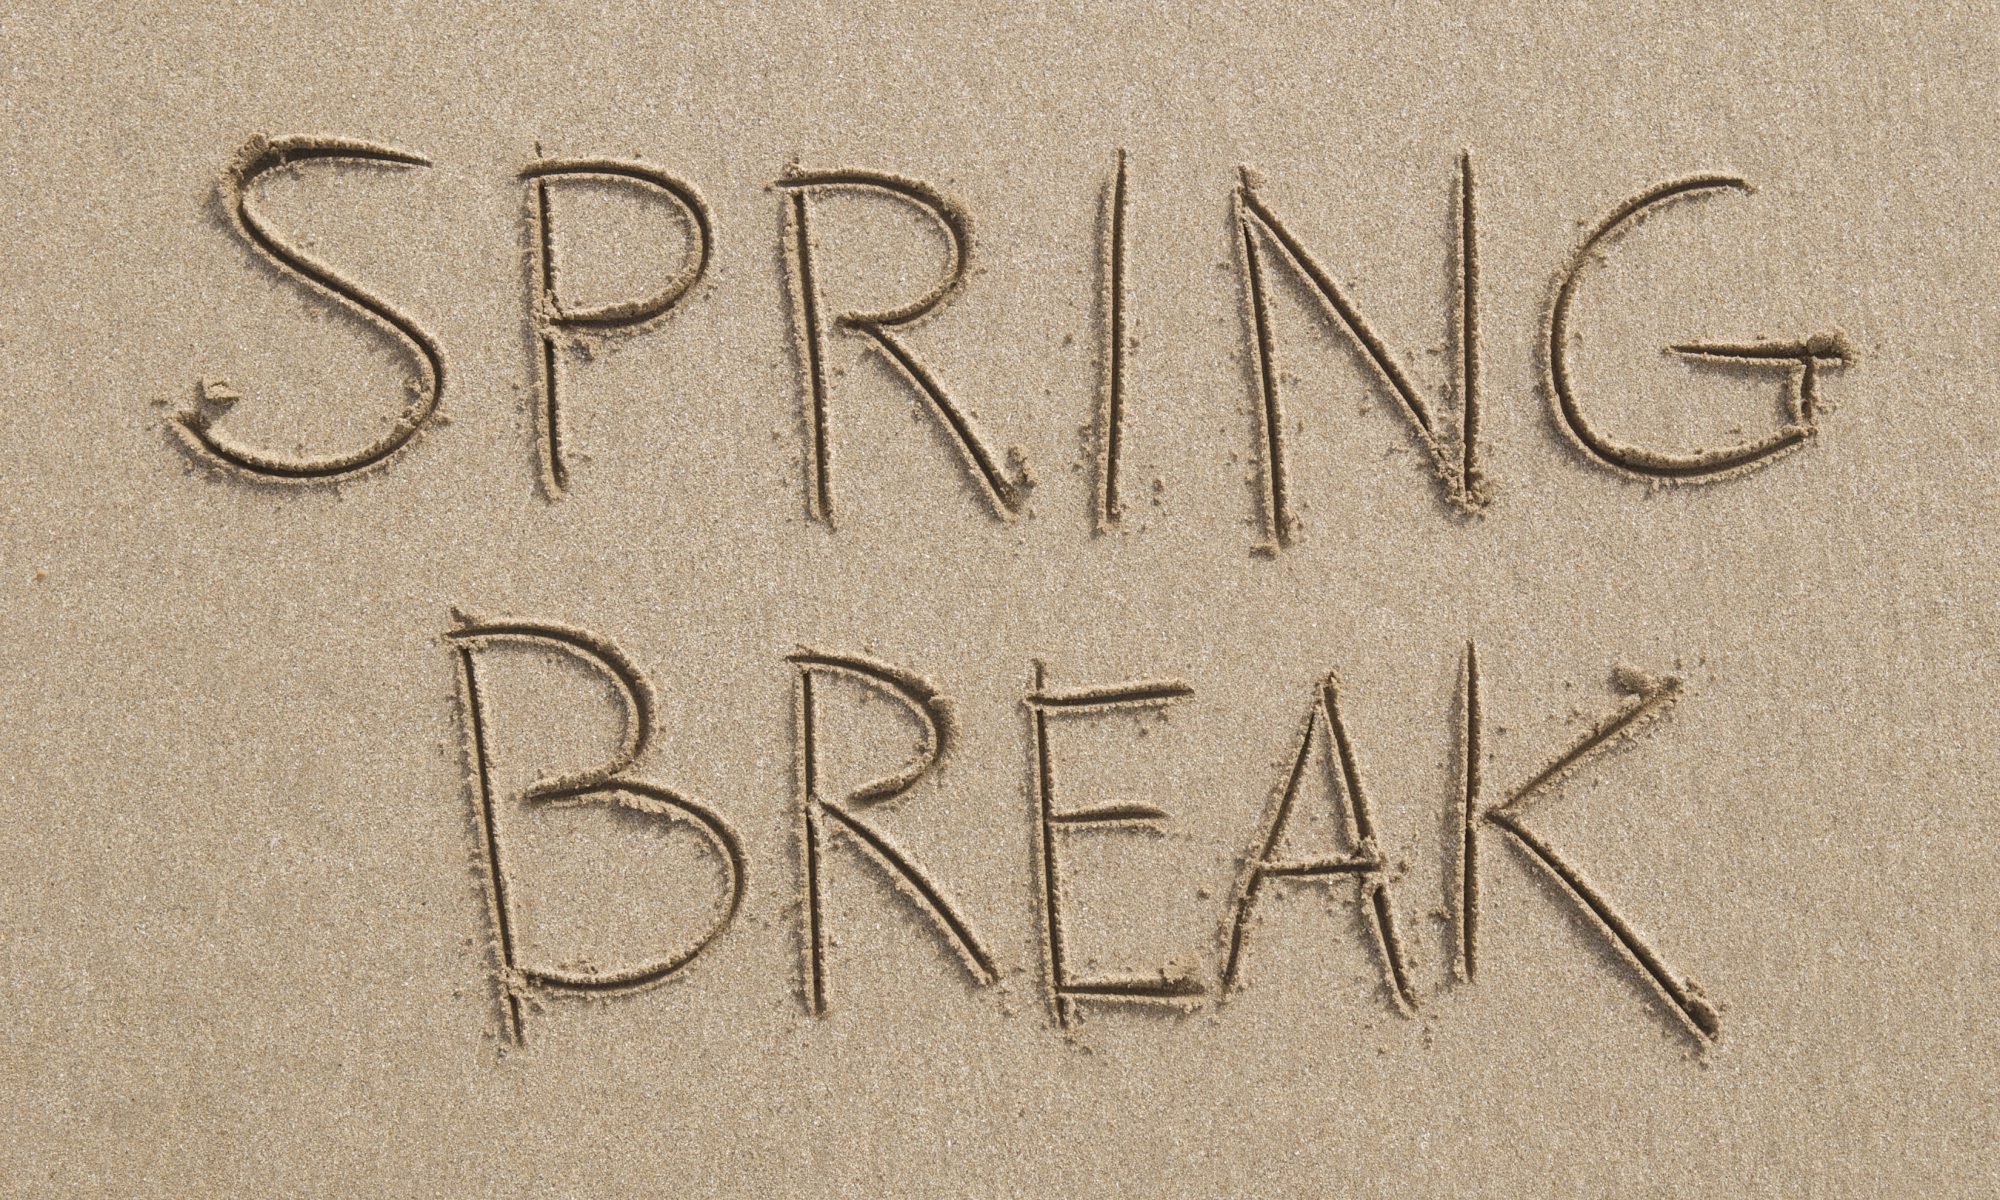 "Spring Break spelled out as clear as it gets in block letters in nice, soft, brown sand"